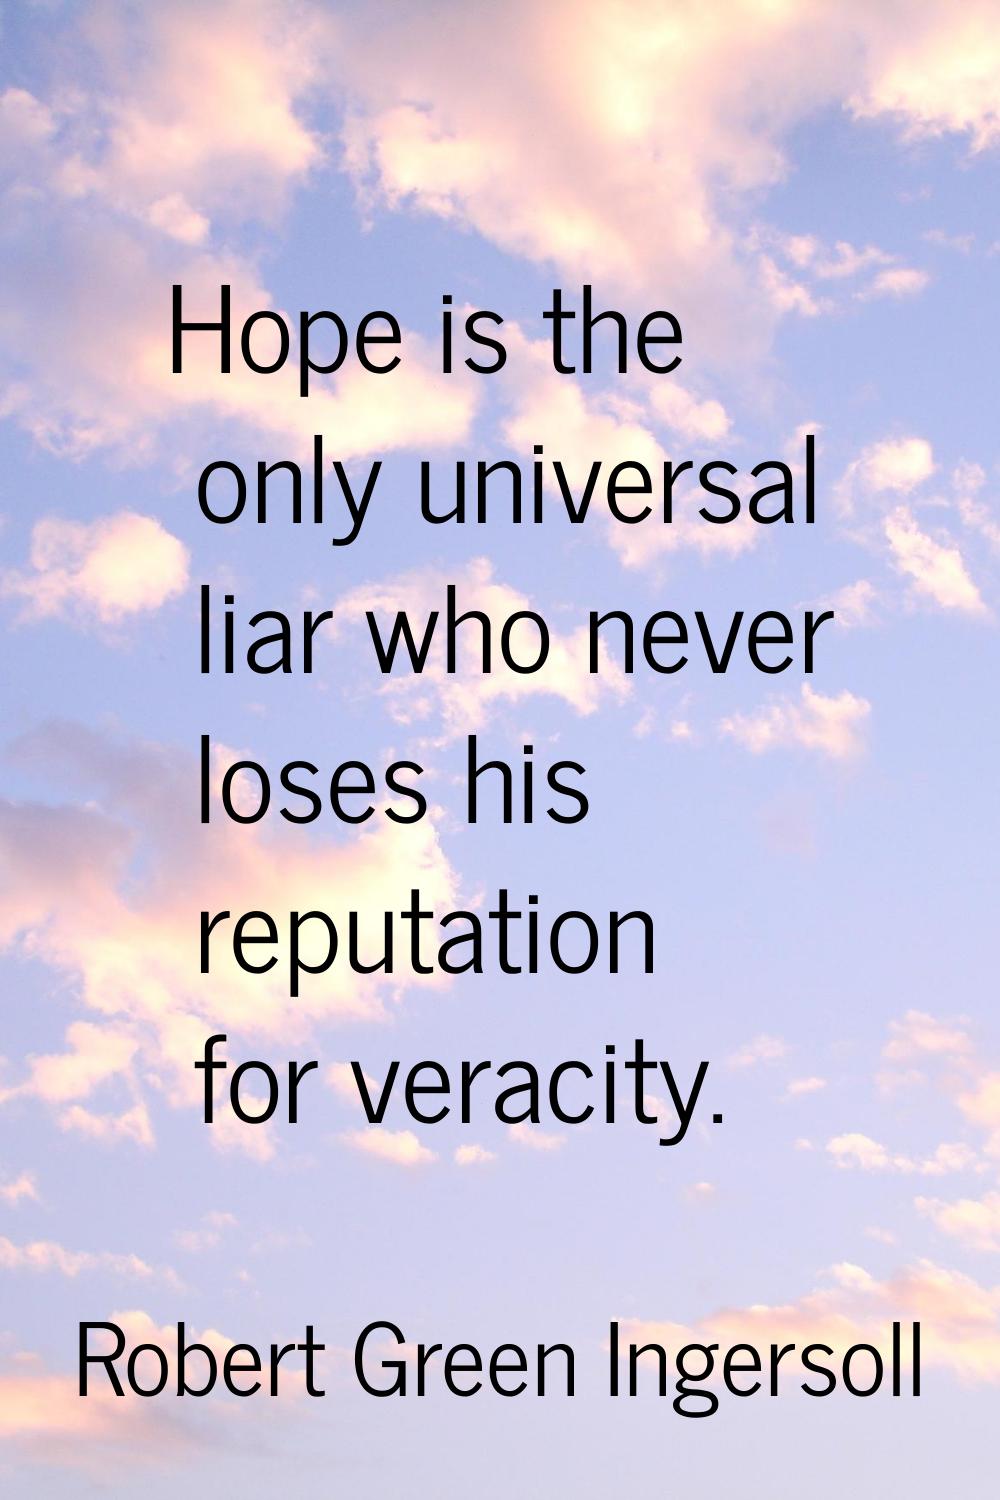 Hope is the only universal liar who never loses his reputation for veracity.